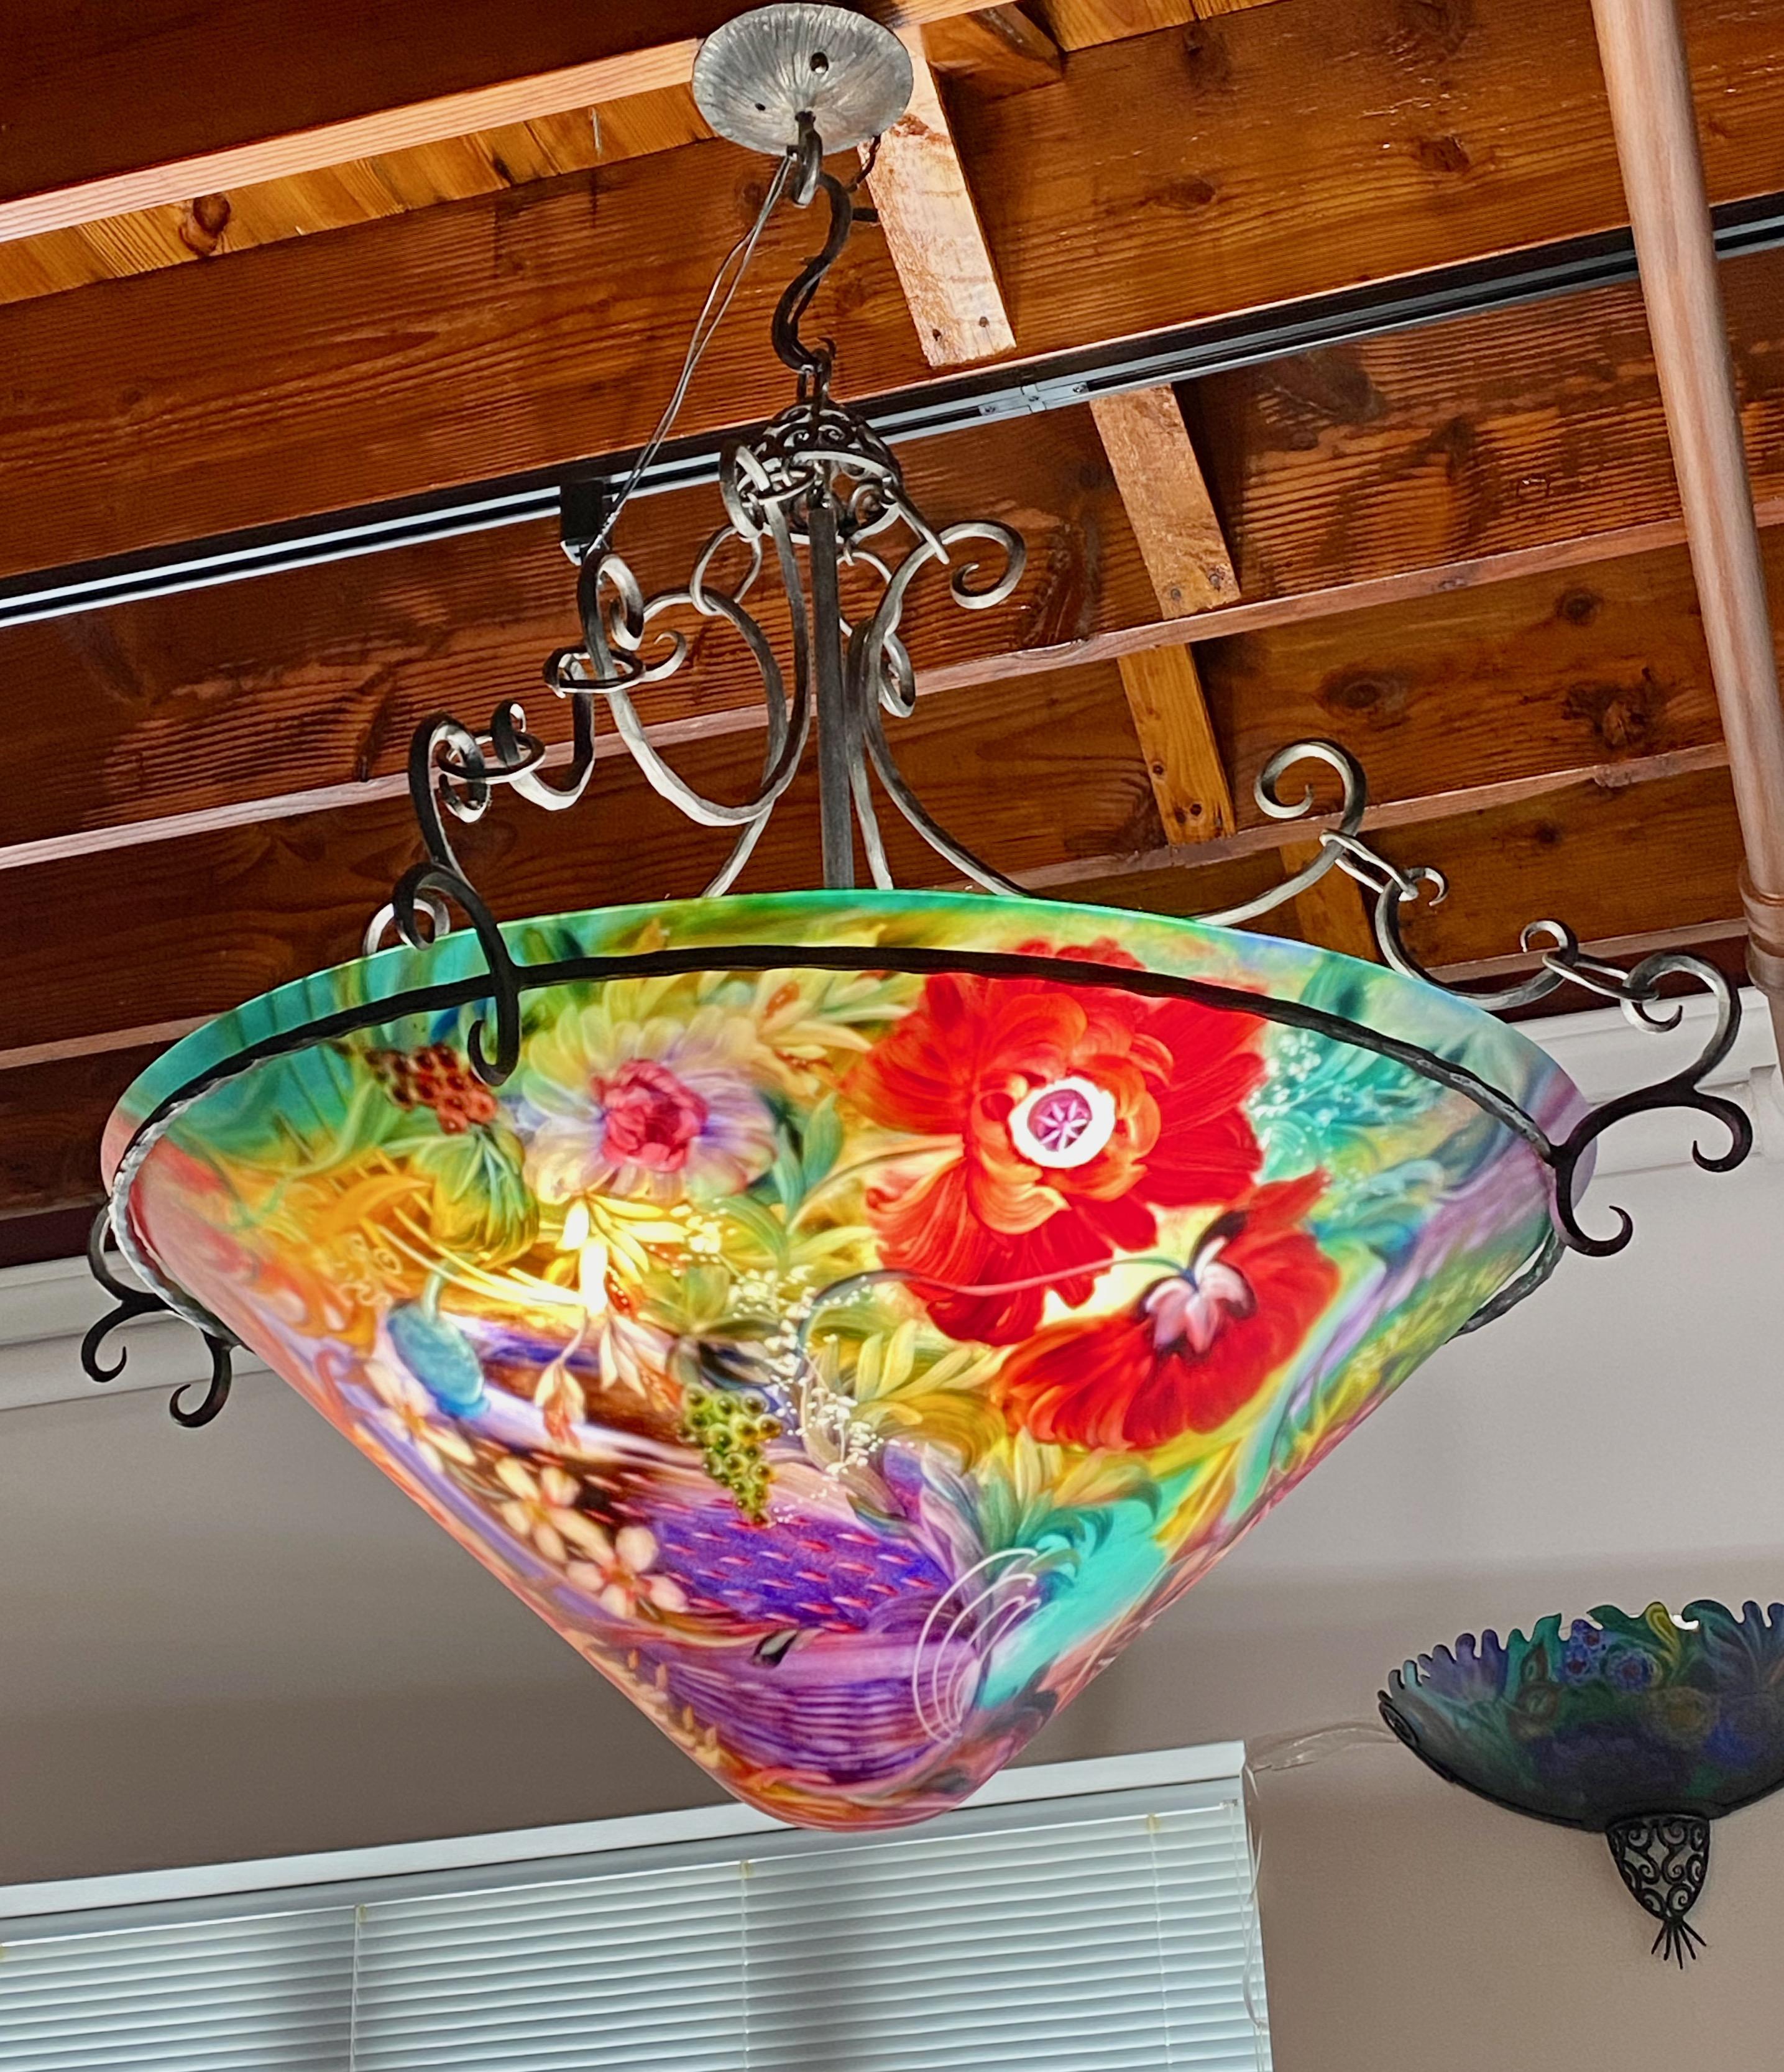 Signed original Ulla Darni cone shape with a 32 inches glass diameter. The overall diameter of the chandelier is 39 inches. The chandelier is reverse painted on glass with hand-forged iron work. Ulla starts with a blank glass surface to paint on.